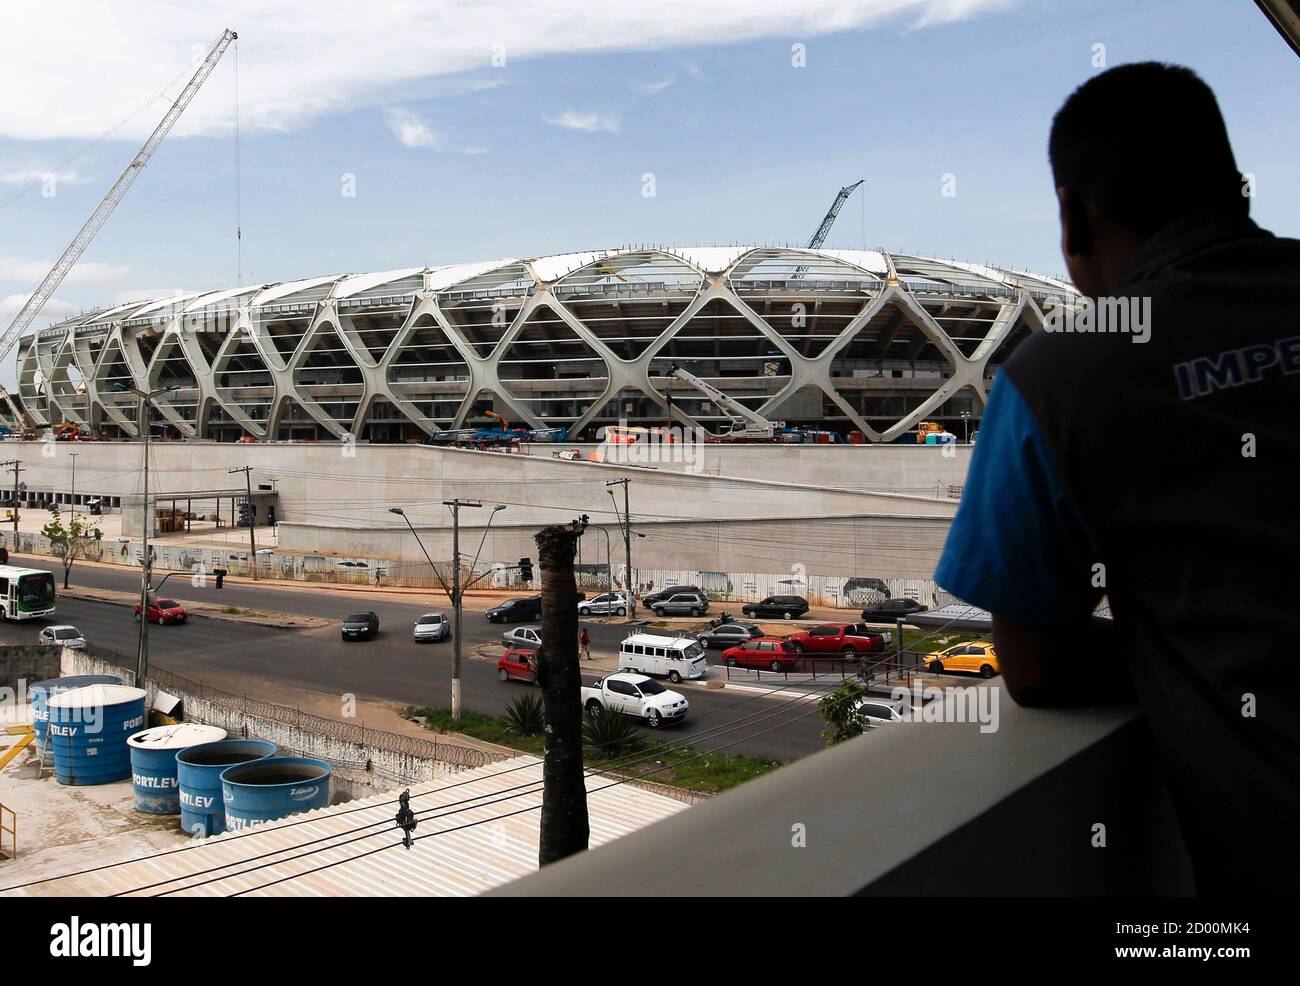 A worker observes the Arena Amazonia stadium under construction to host several 2014 World Cup soccer games, in Manaus December 14, 2013. Construction worker Marcleudo de Melo Ferreira fell to his death from the roof earlier in the day after a cable broke, adding to safety concerns as the country races to finish building in time to host the 2014 World Cup of soccer. REUTERS/Bruno Kelly (BRAZIL - Tags: SPORT SOCCER WORLD CUP DISASTER BUSINESS CONSTRUCTION) Stock Photo